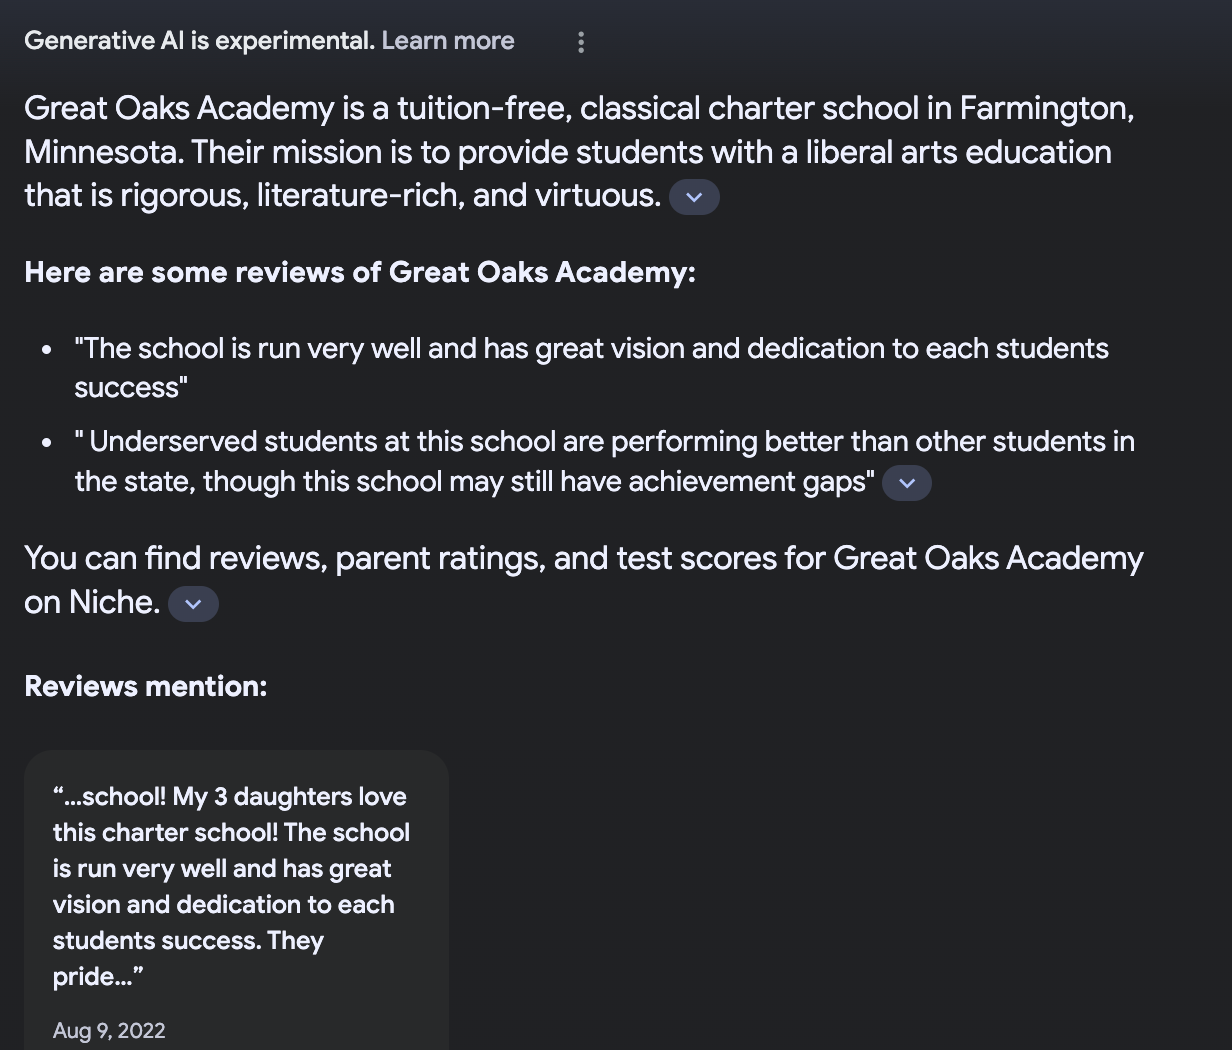 A black background with white text screenshot of an Google's SGE (Search Generated Experience powered by AI) delivering facts and reviews about a school called Great Oaks Academy. Parent reviews on your website or google allow for AI to deliver a summary of the overall vibe of your school to searching parents. 